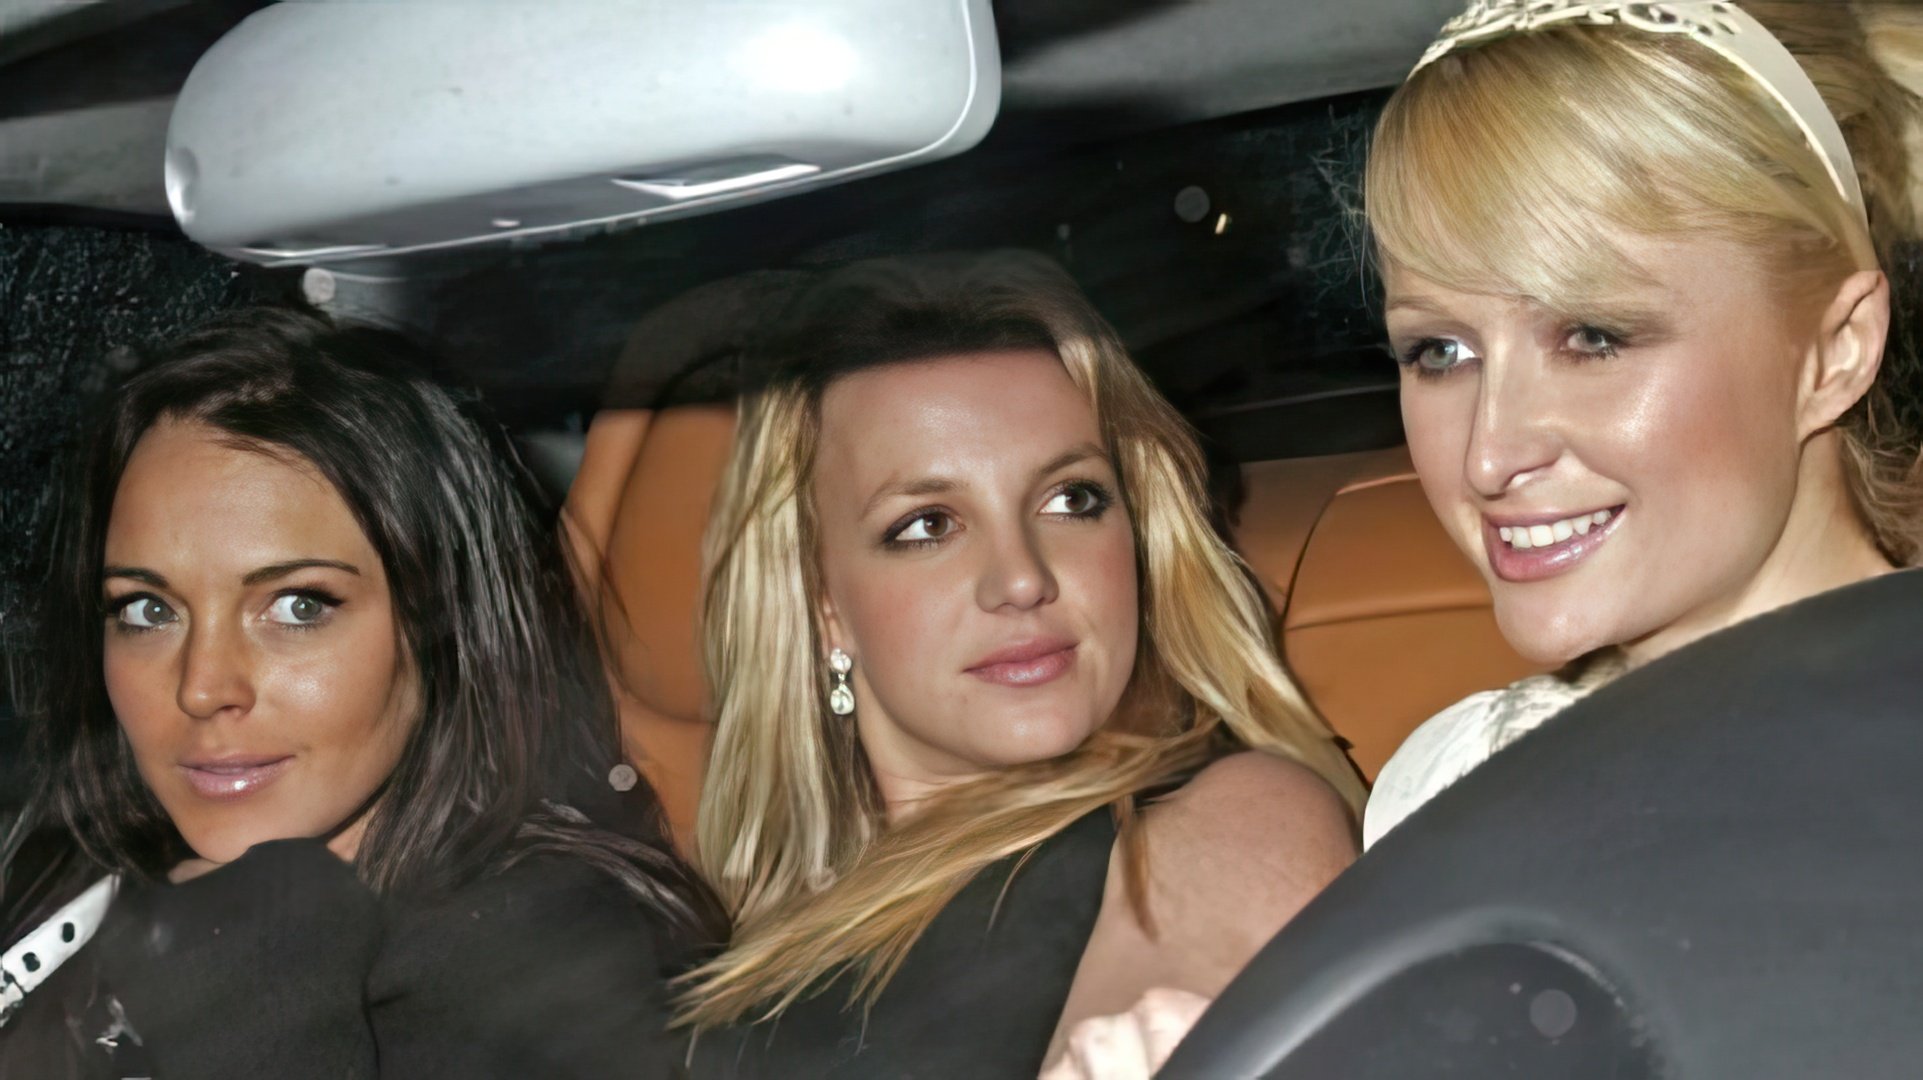 Lindsay Lohan, Britney Spears and Paris Hilton hung out together